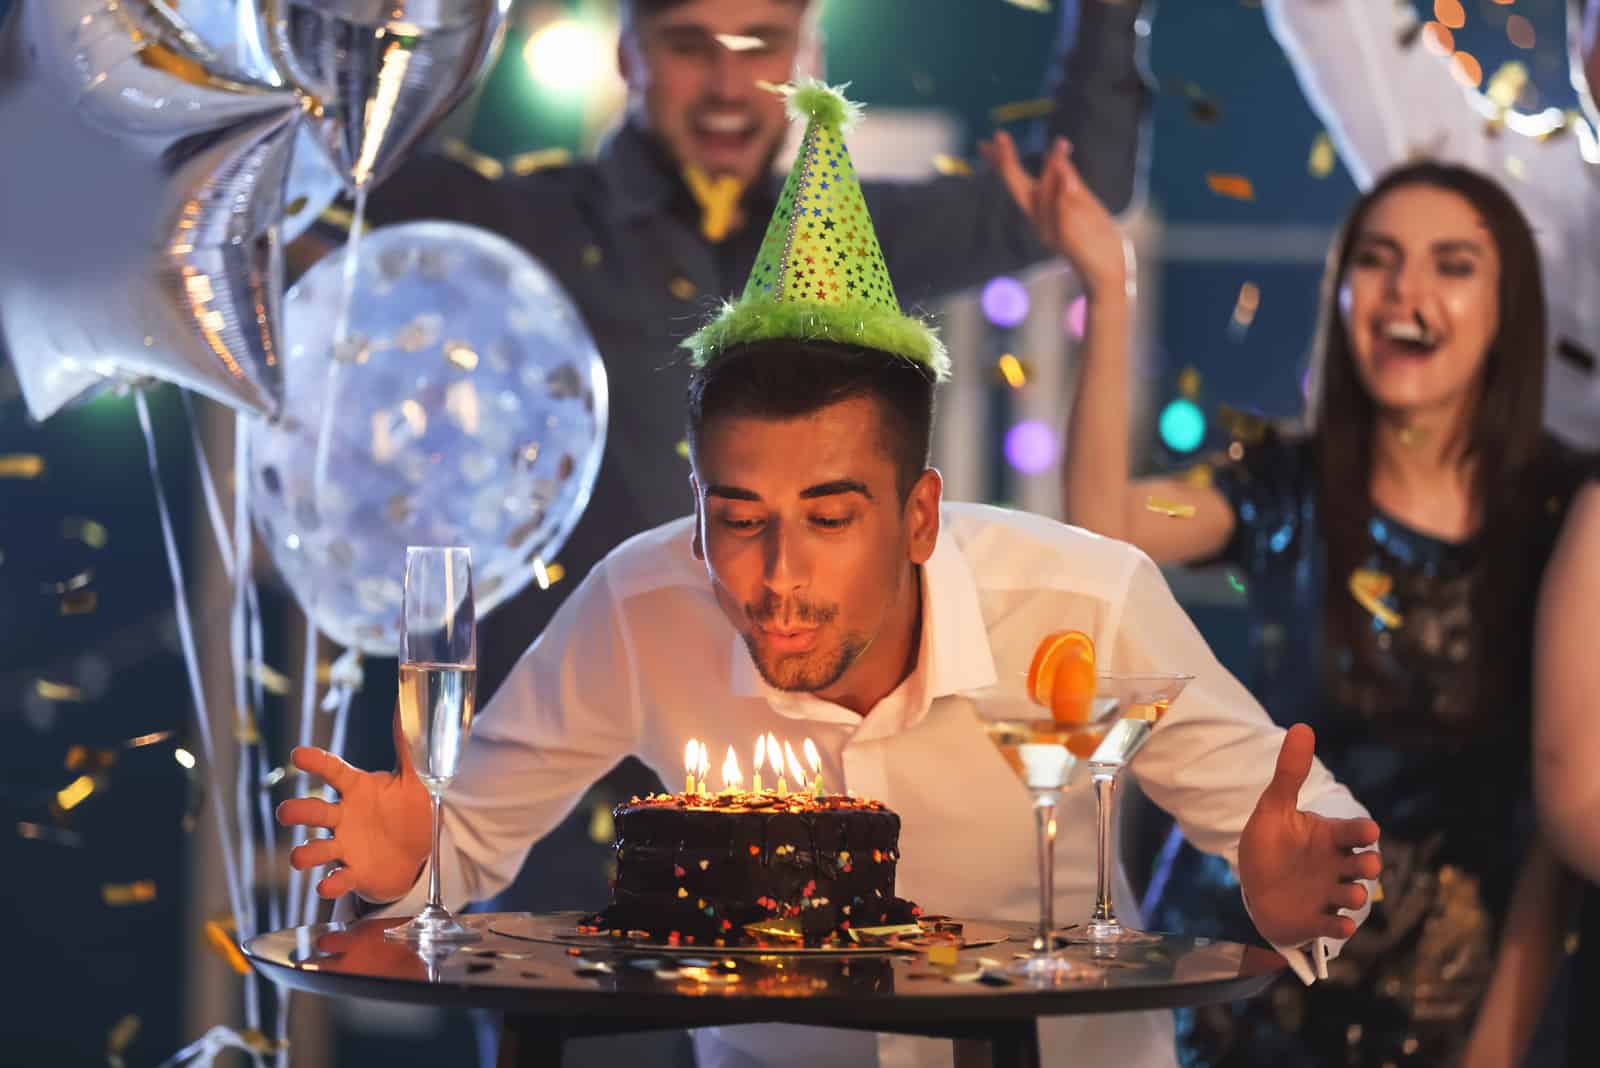 a man blowing into a cake